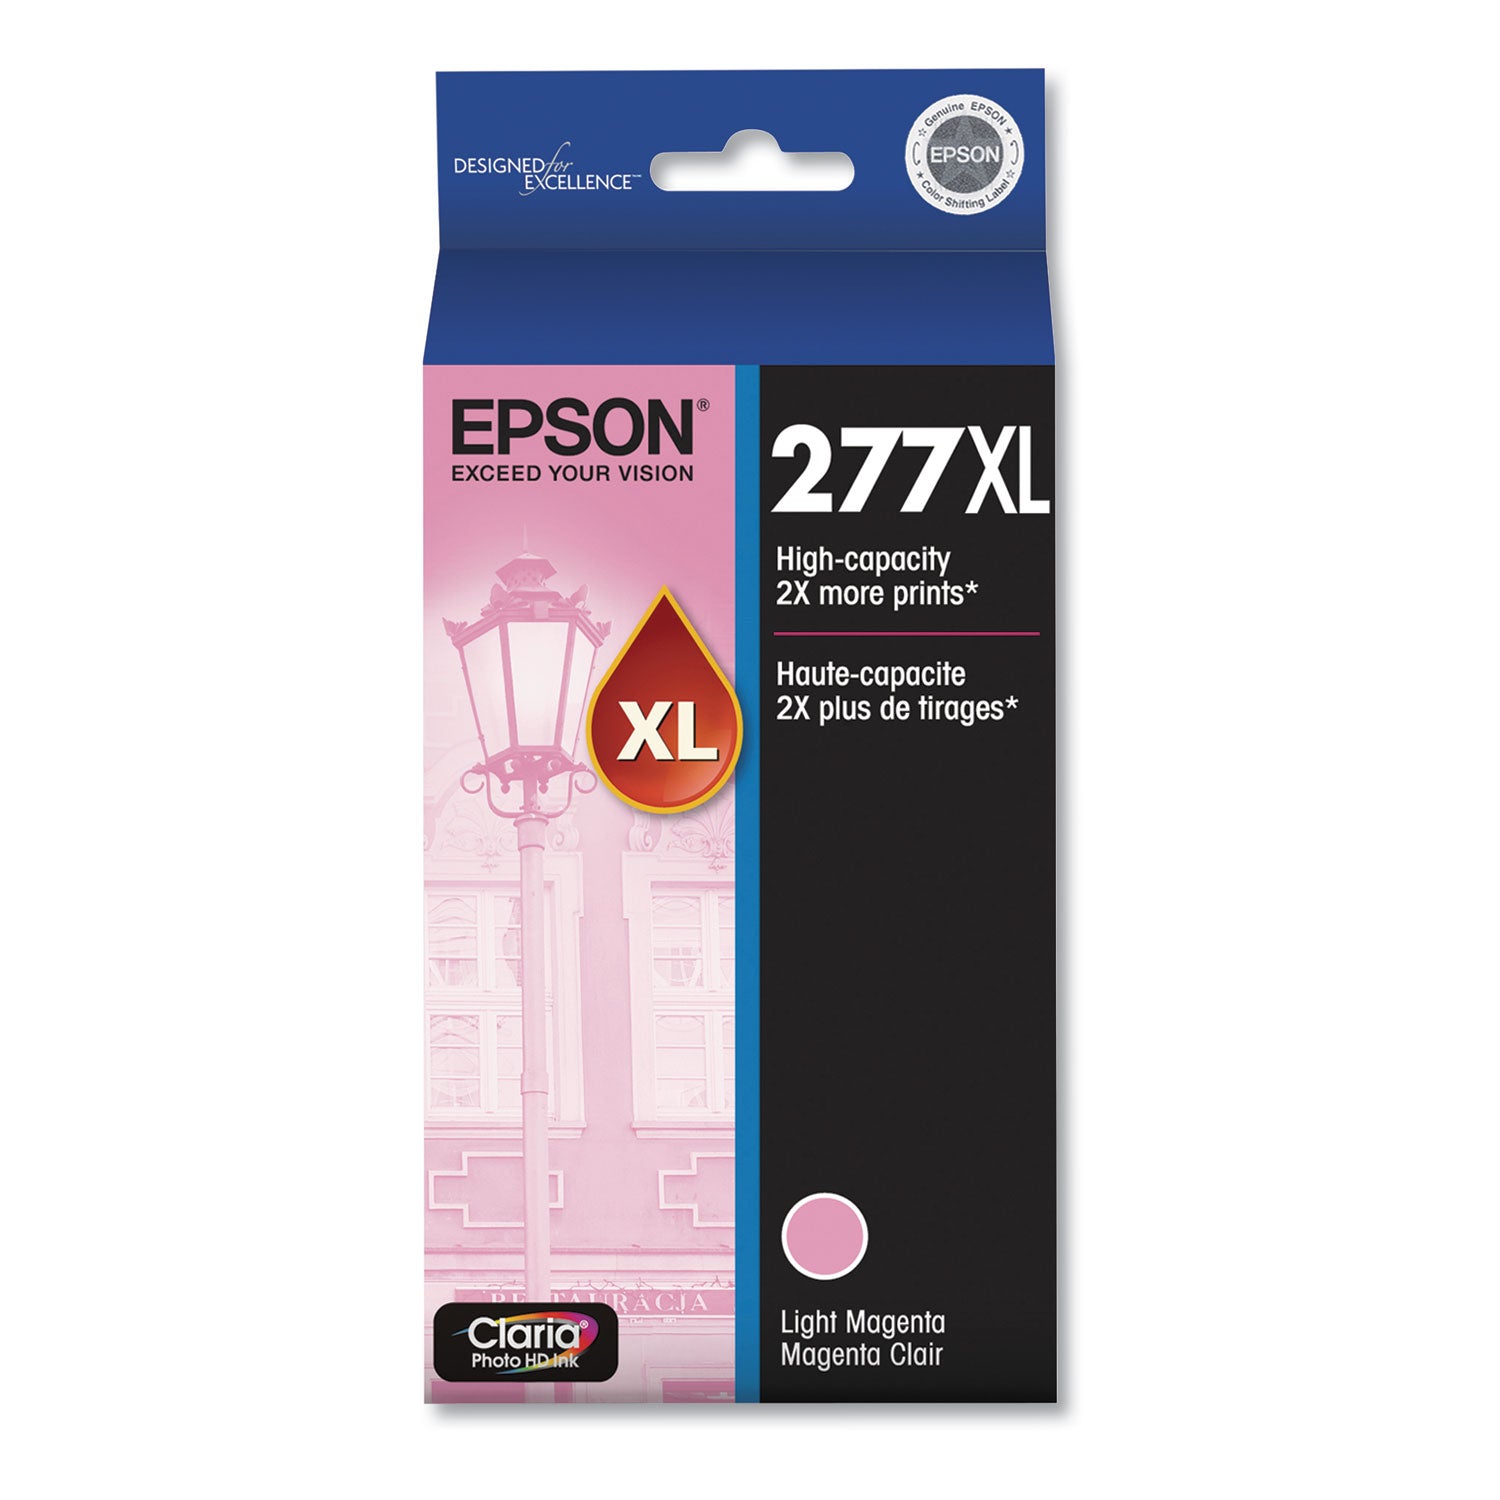 t277xl620-s-277xl-claria-high-yield-ink-740-page-yield-light-magenta_epst277xl620s - 1